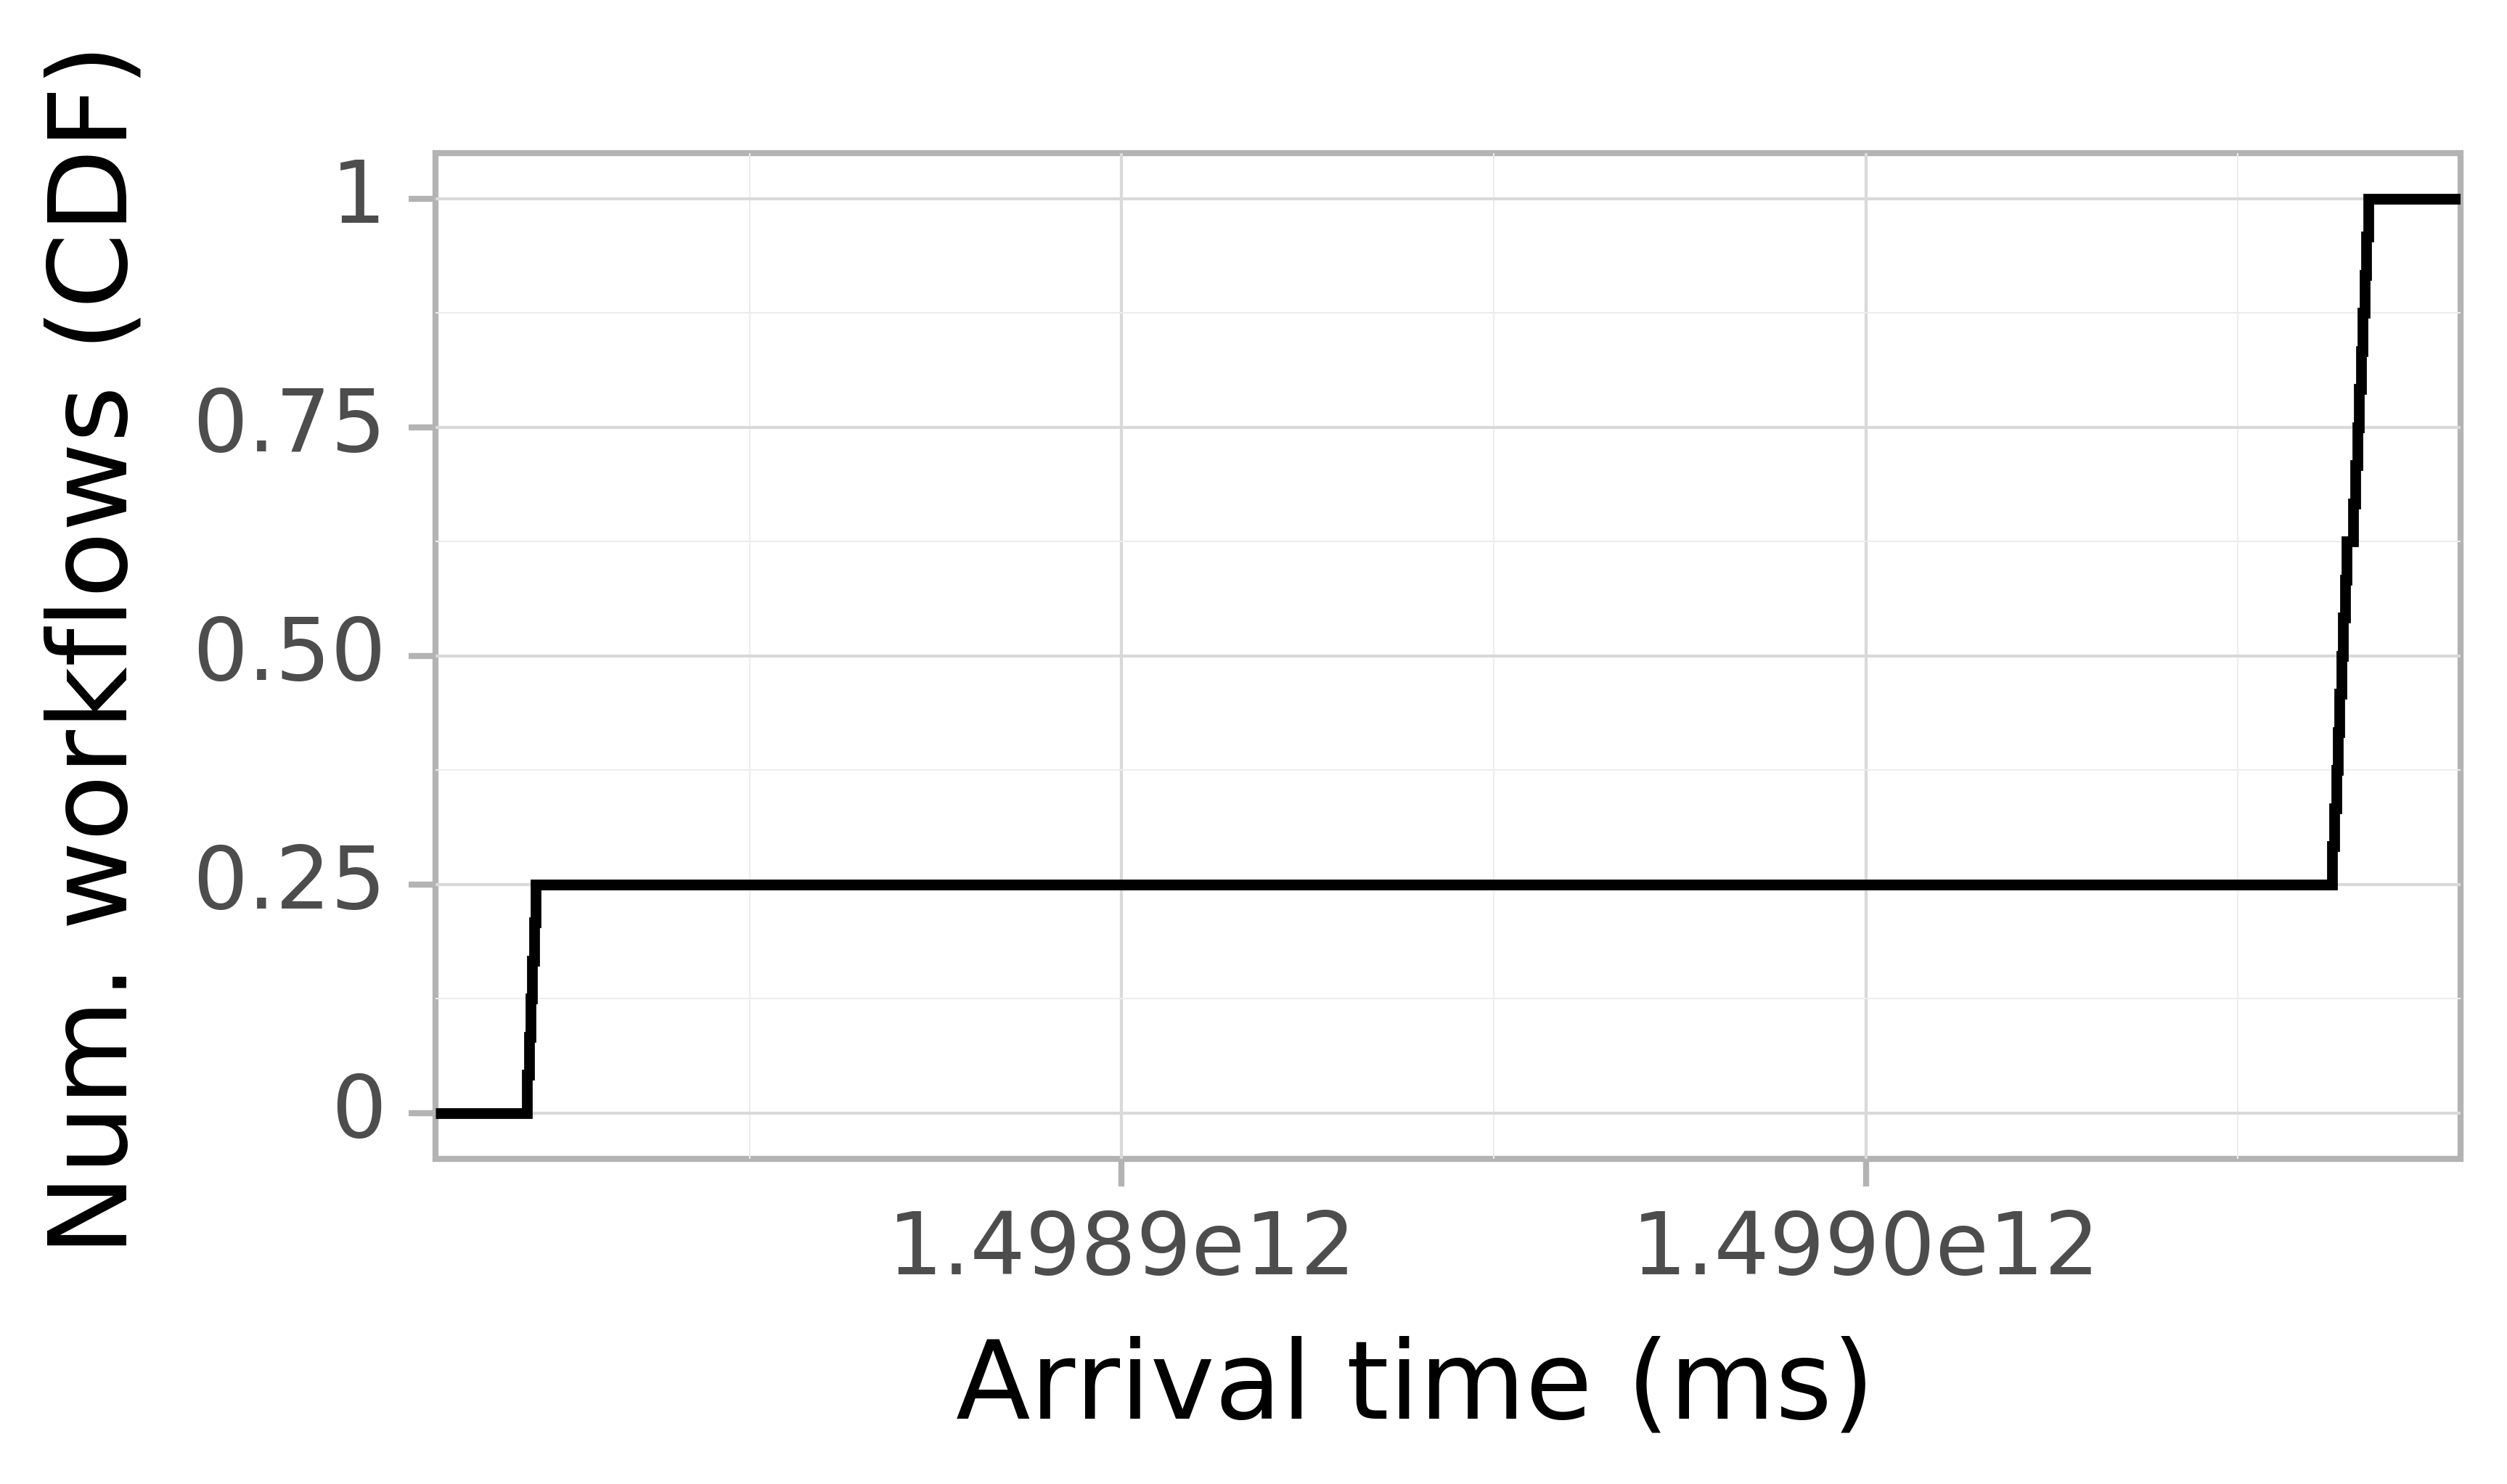 Job arrival CDF graph for the askalon-new_ee33 trace.